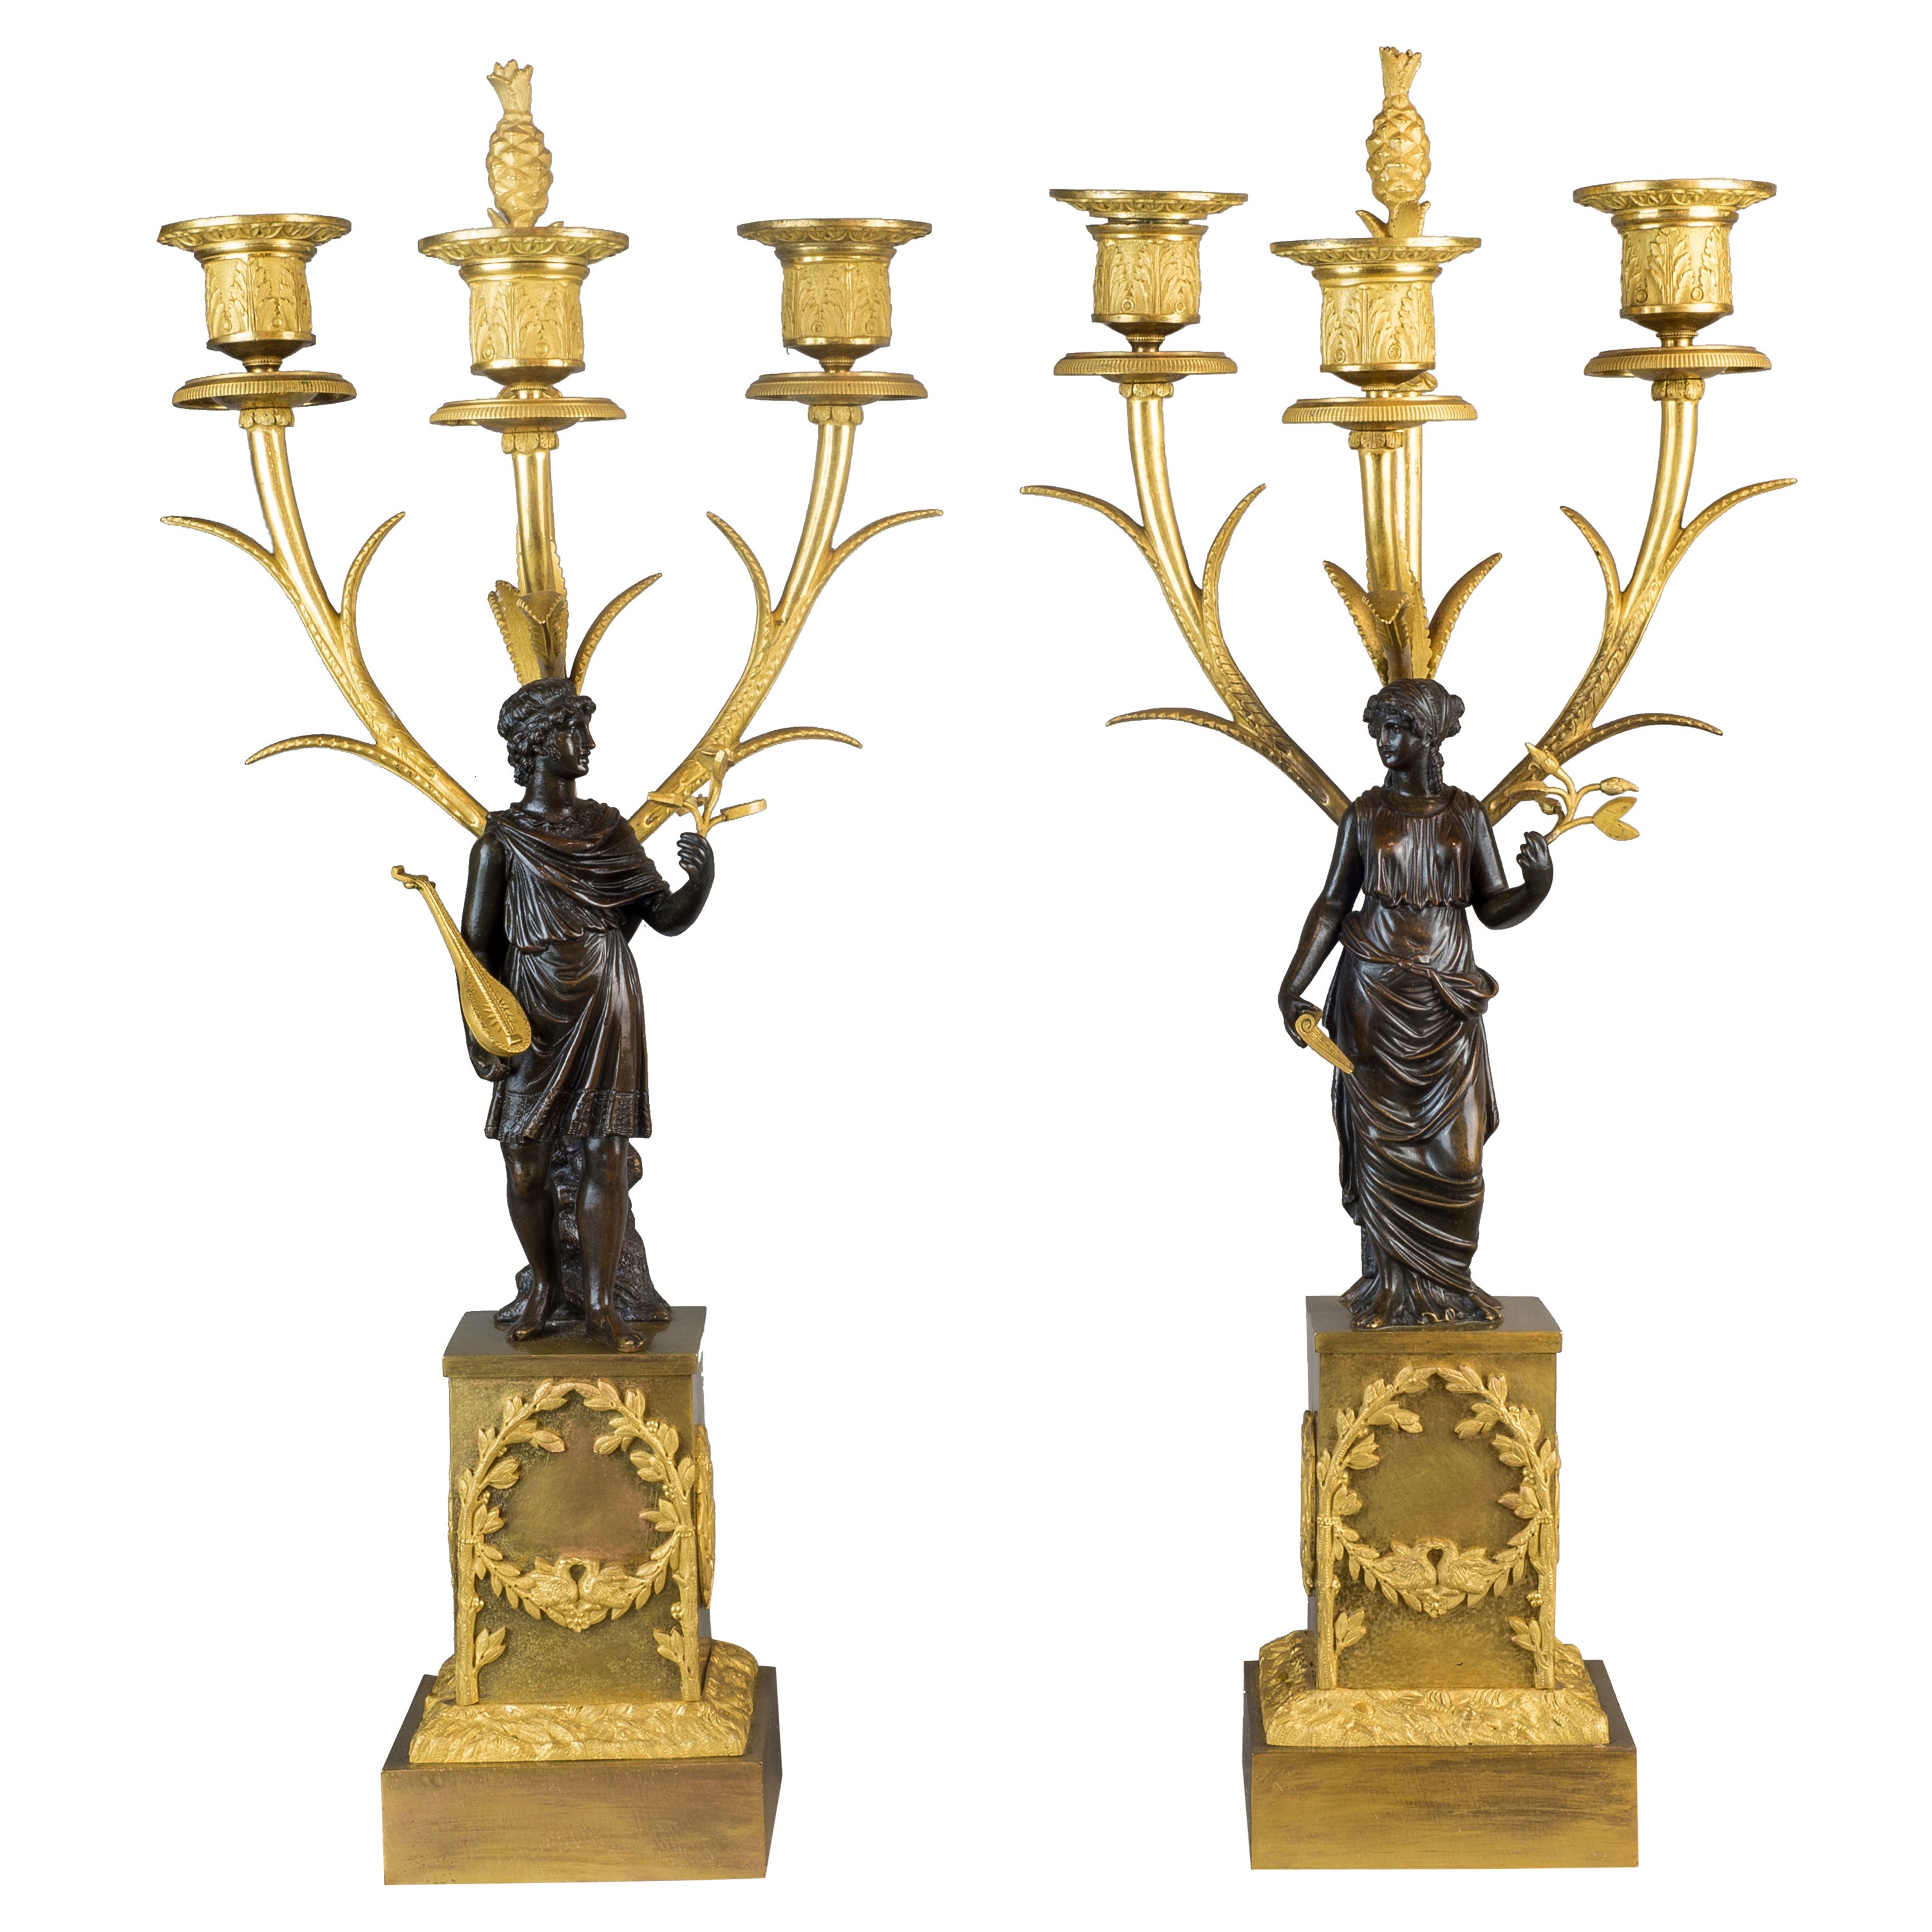 Fine Patinated and Gilt Bronze Three-Light Figural Candelabras